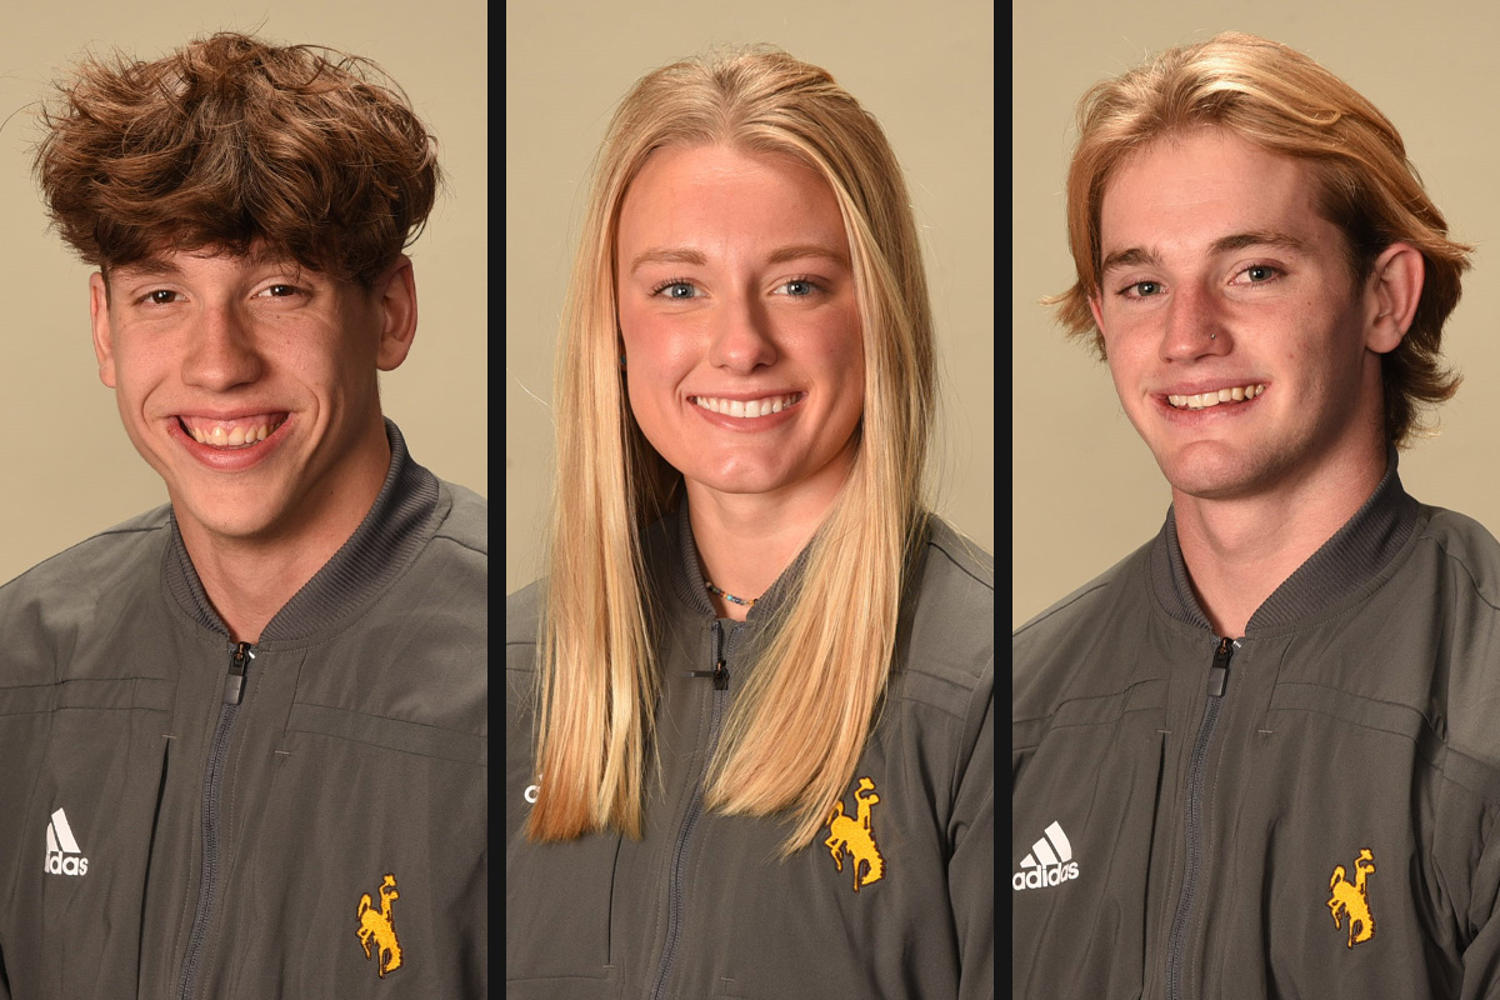 Three University of Wyoming swimmers killed and two injured in highway crash